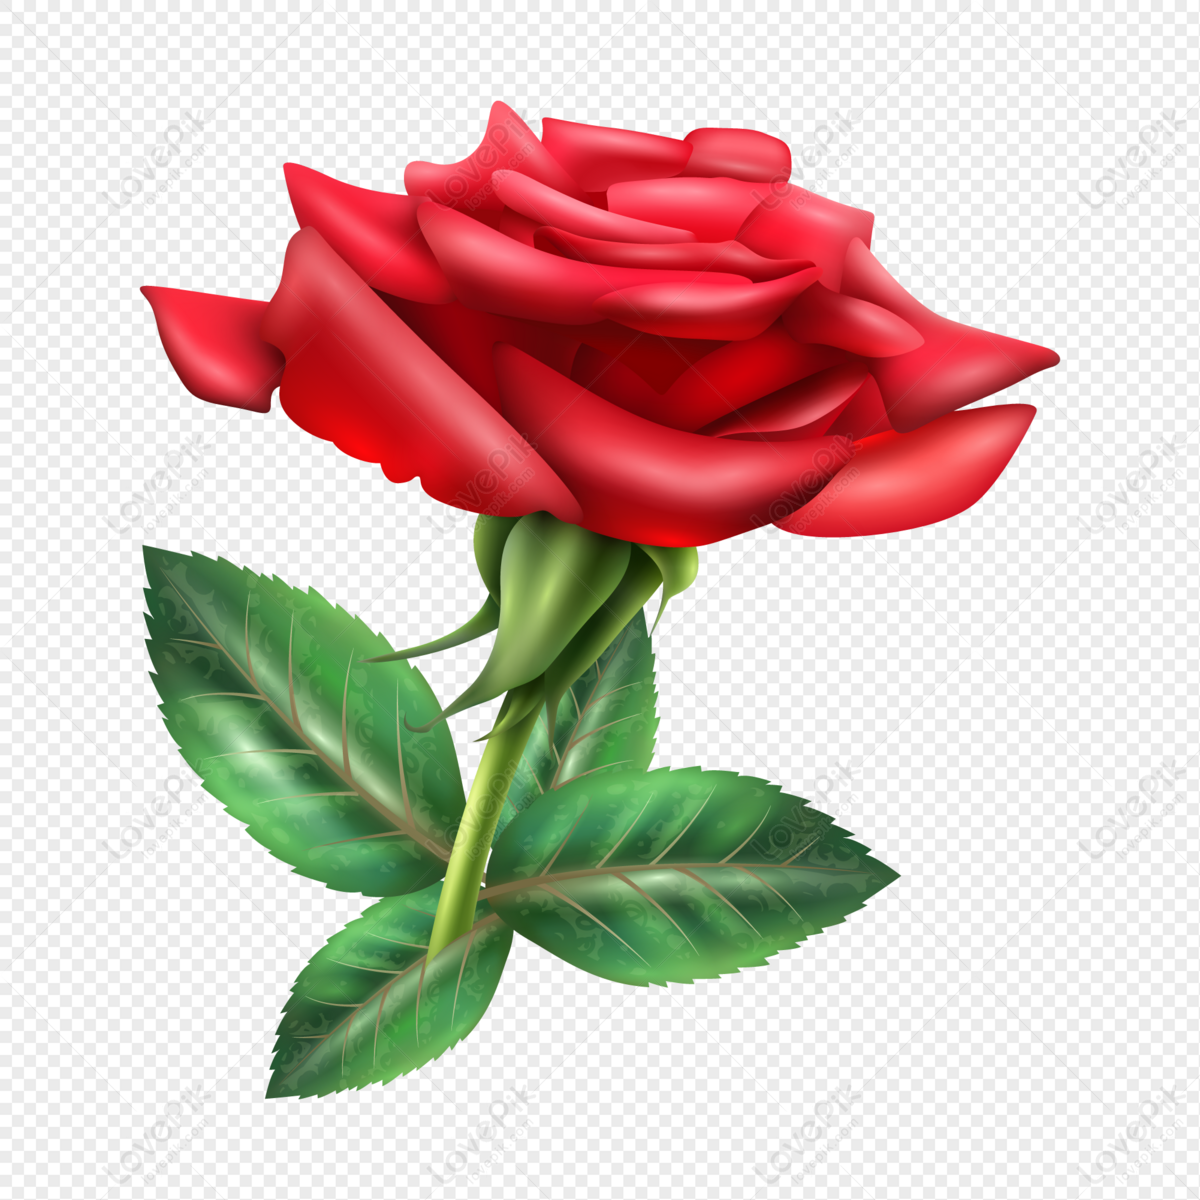 Vector Rose PNG Picture And Clipart Image For Free Download ...